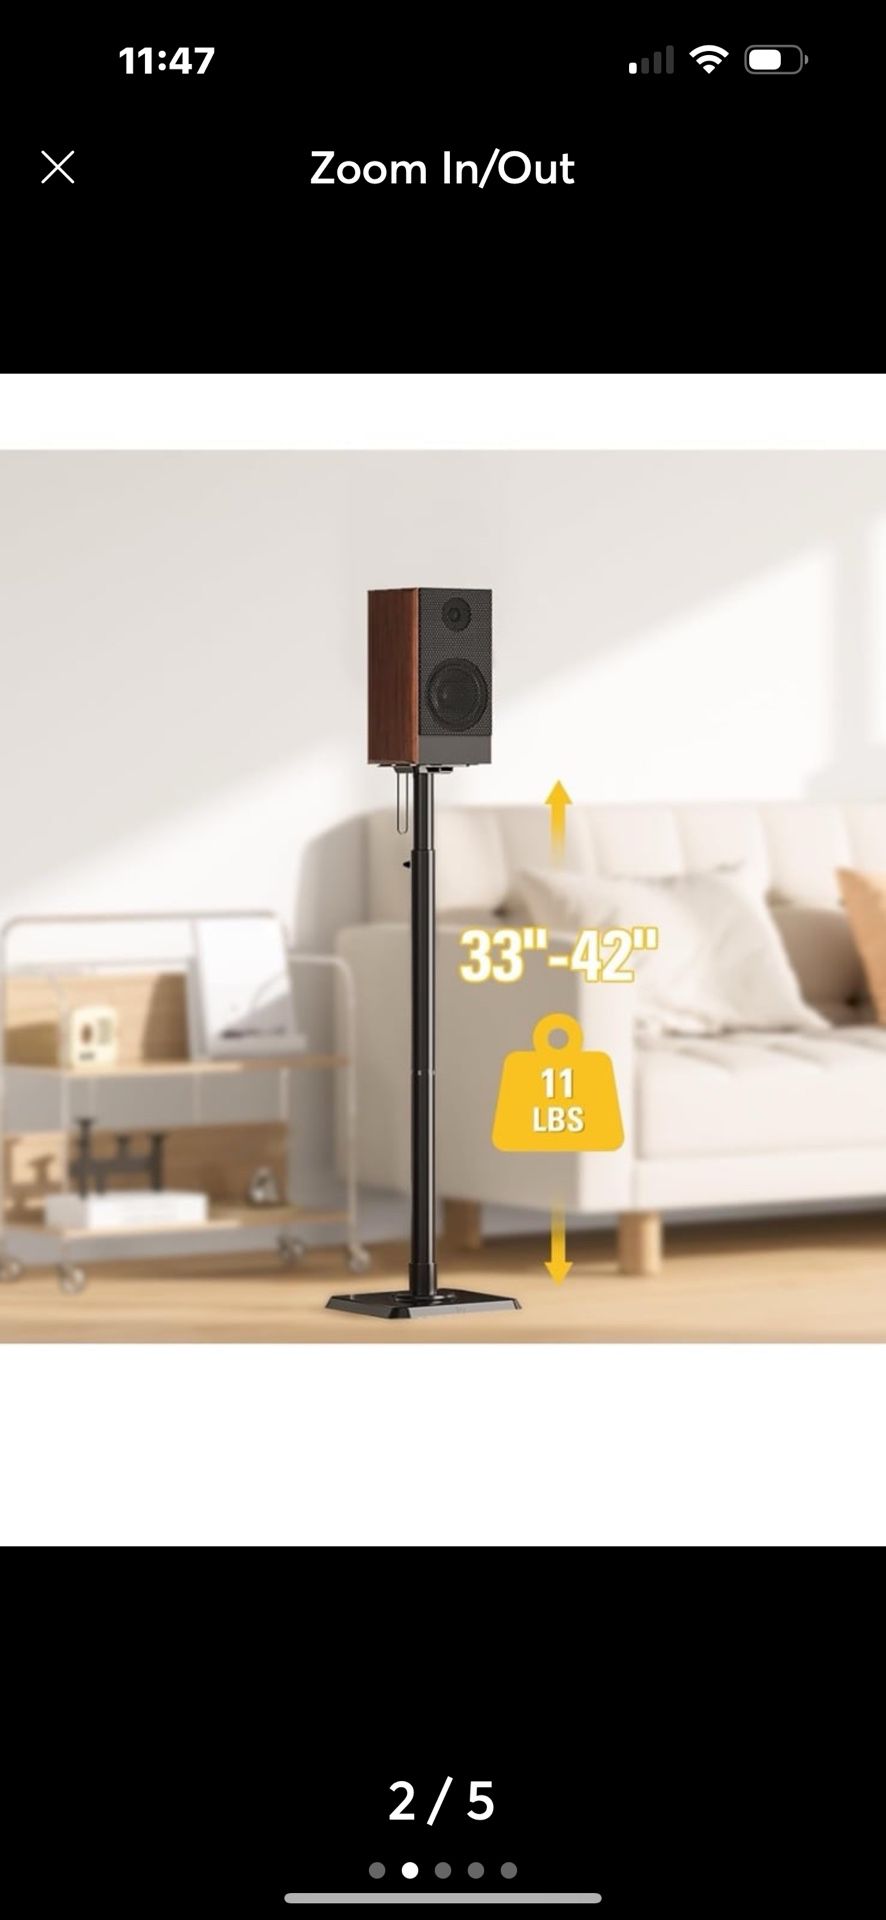 Mounting Dream Speaker Stands